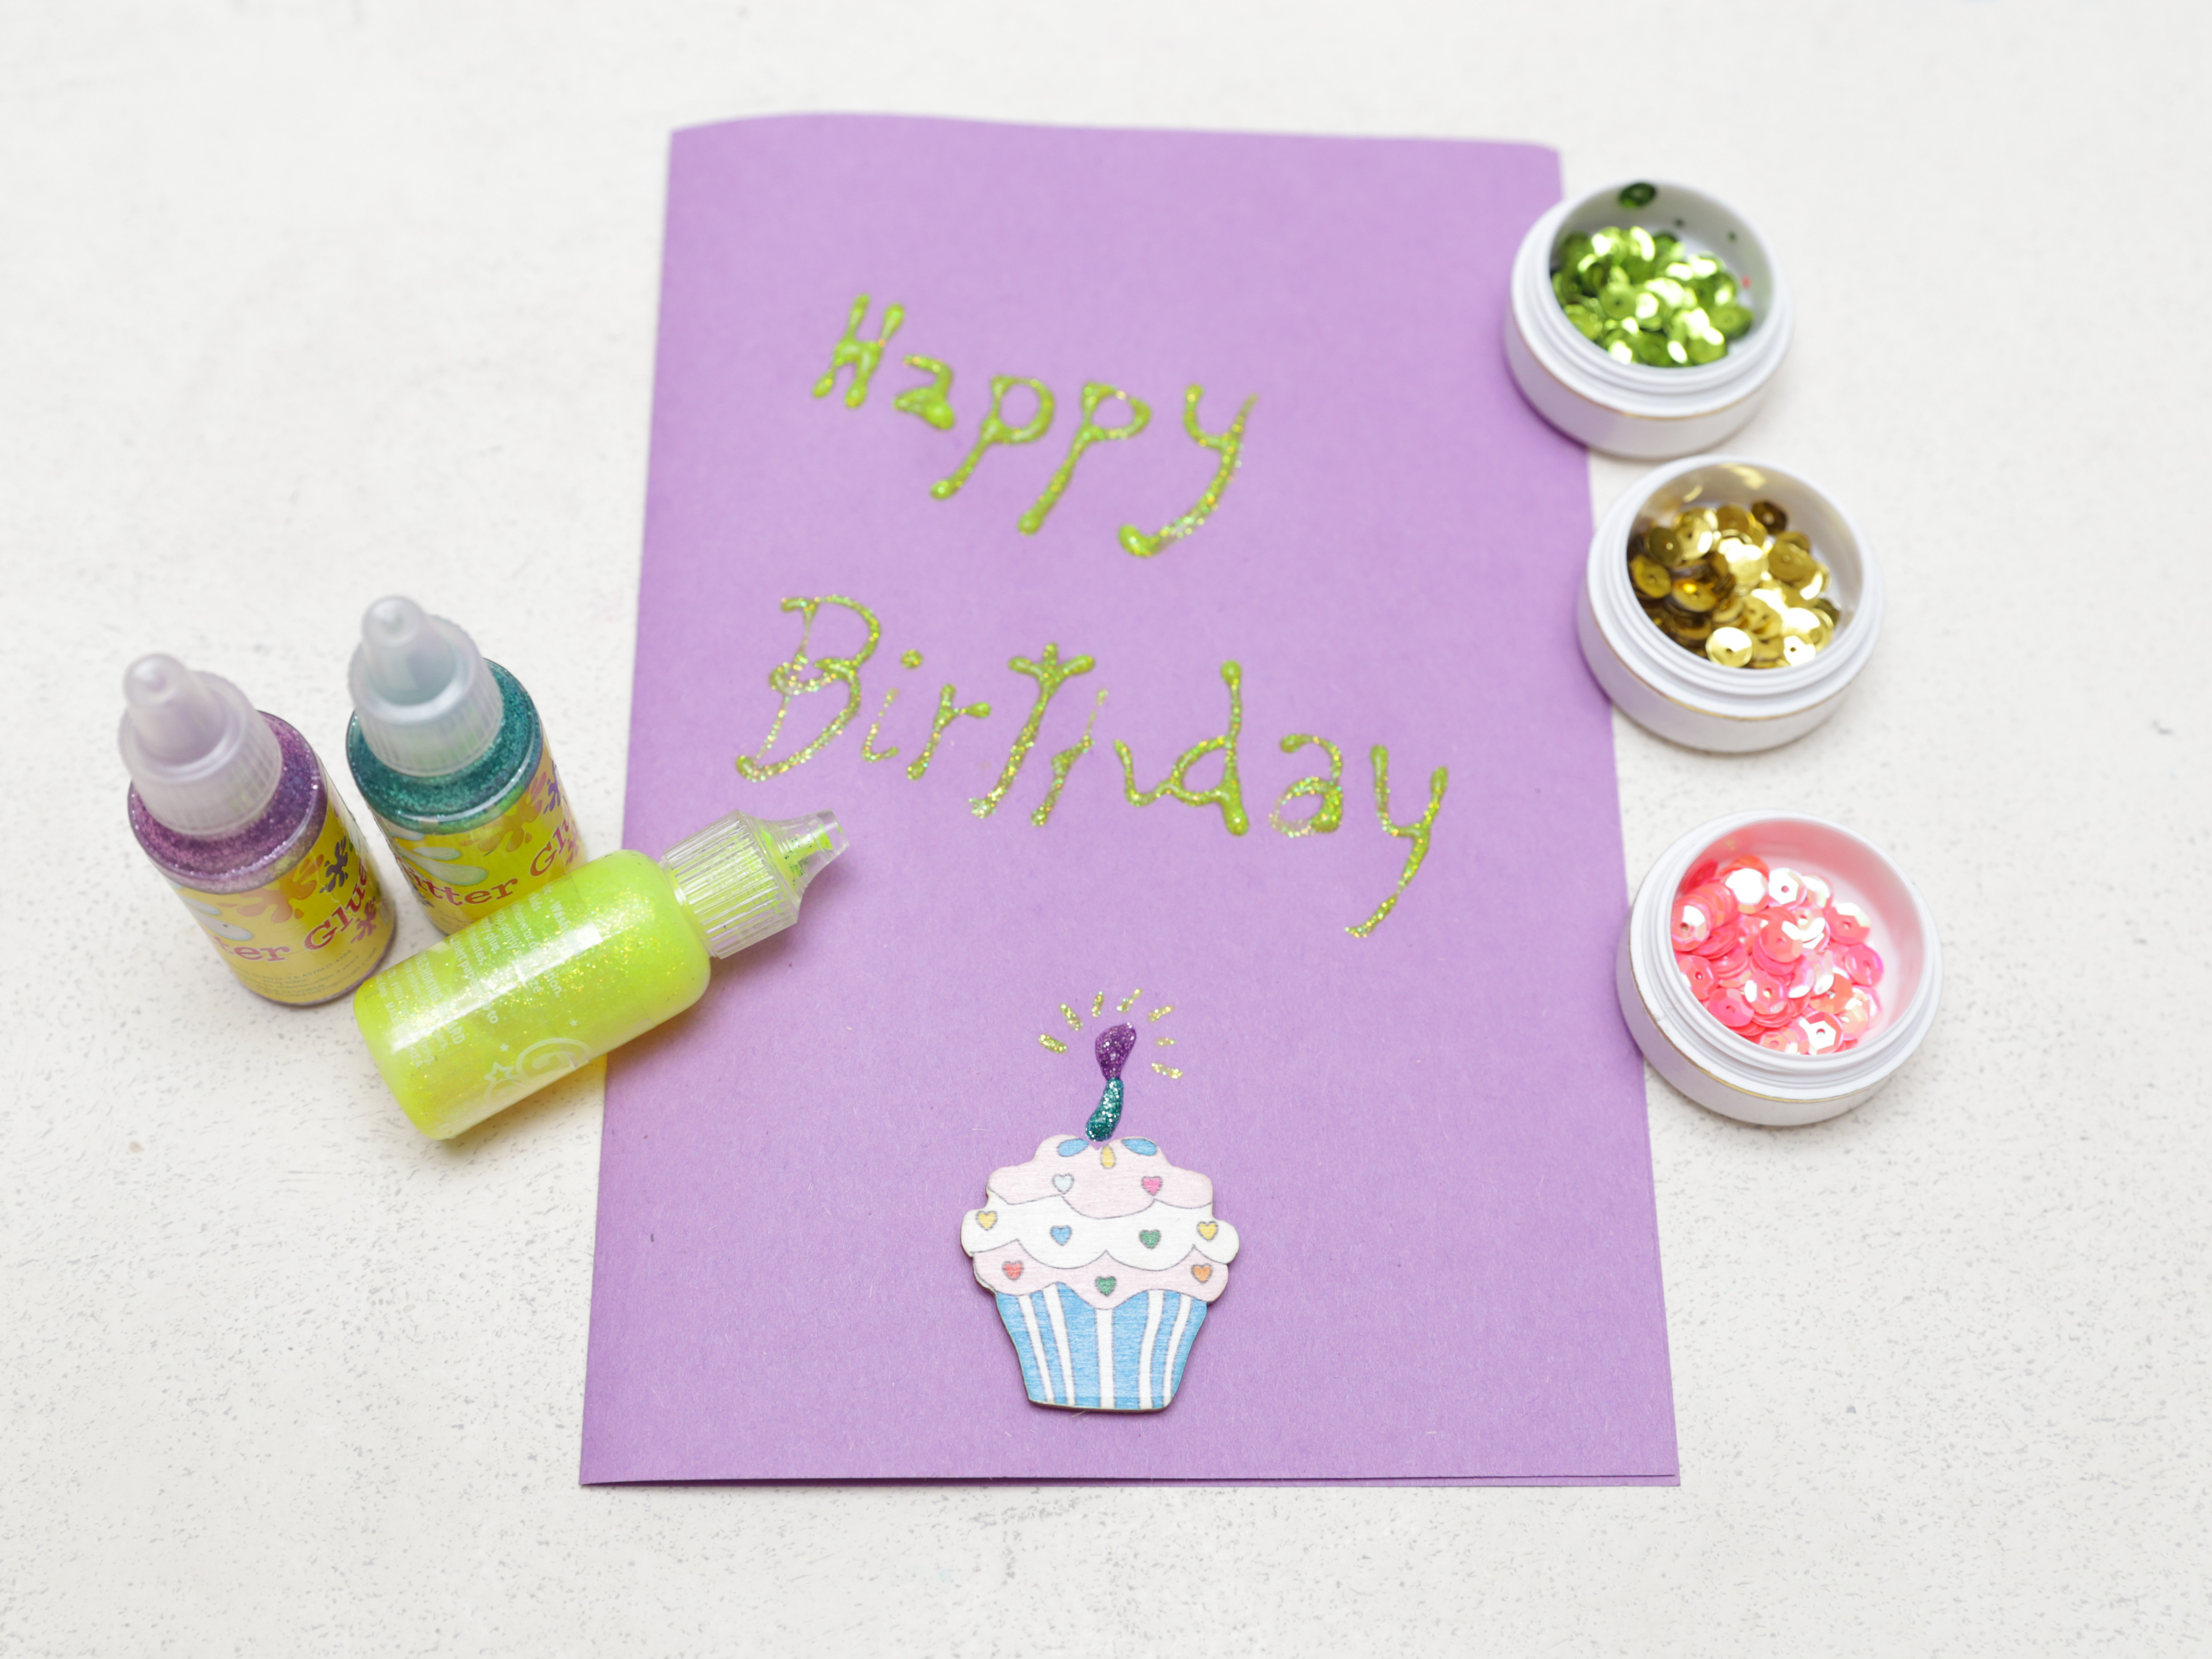 Homemade Birthday Cards For Dad Ideas How To Make A Simple Handmade Birthday Card 15 Steps